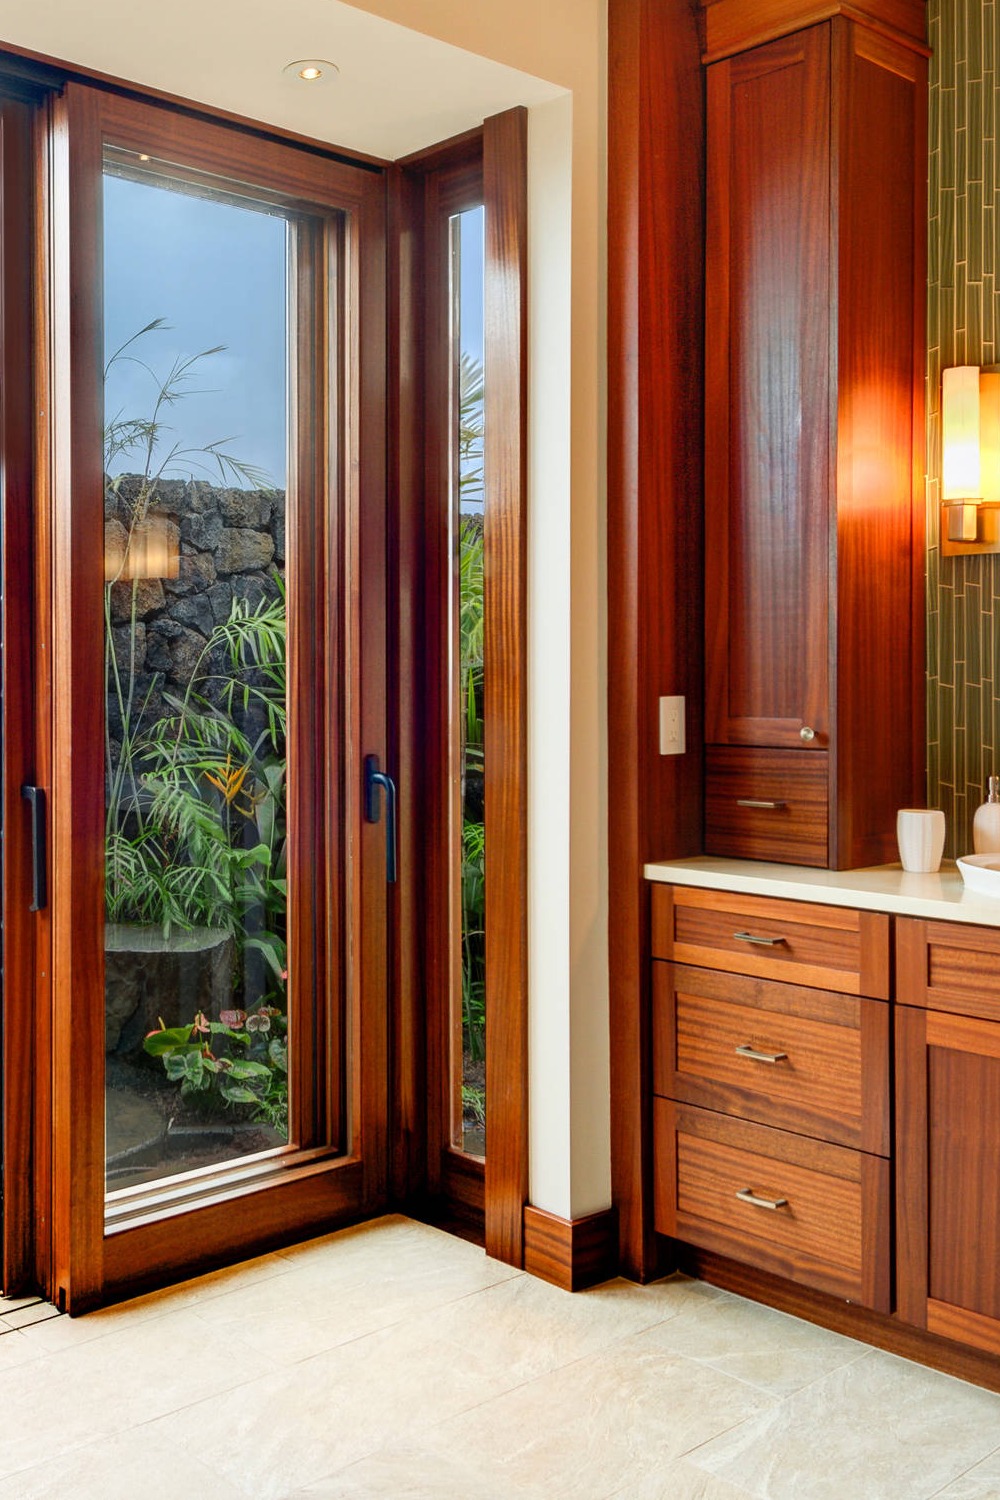 Greenery Bright Island Leaf Space Lights Window Cabinets Light Natural Tile Tropical Bathroom Style Vanity Shower Plants